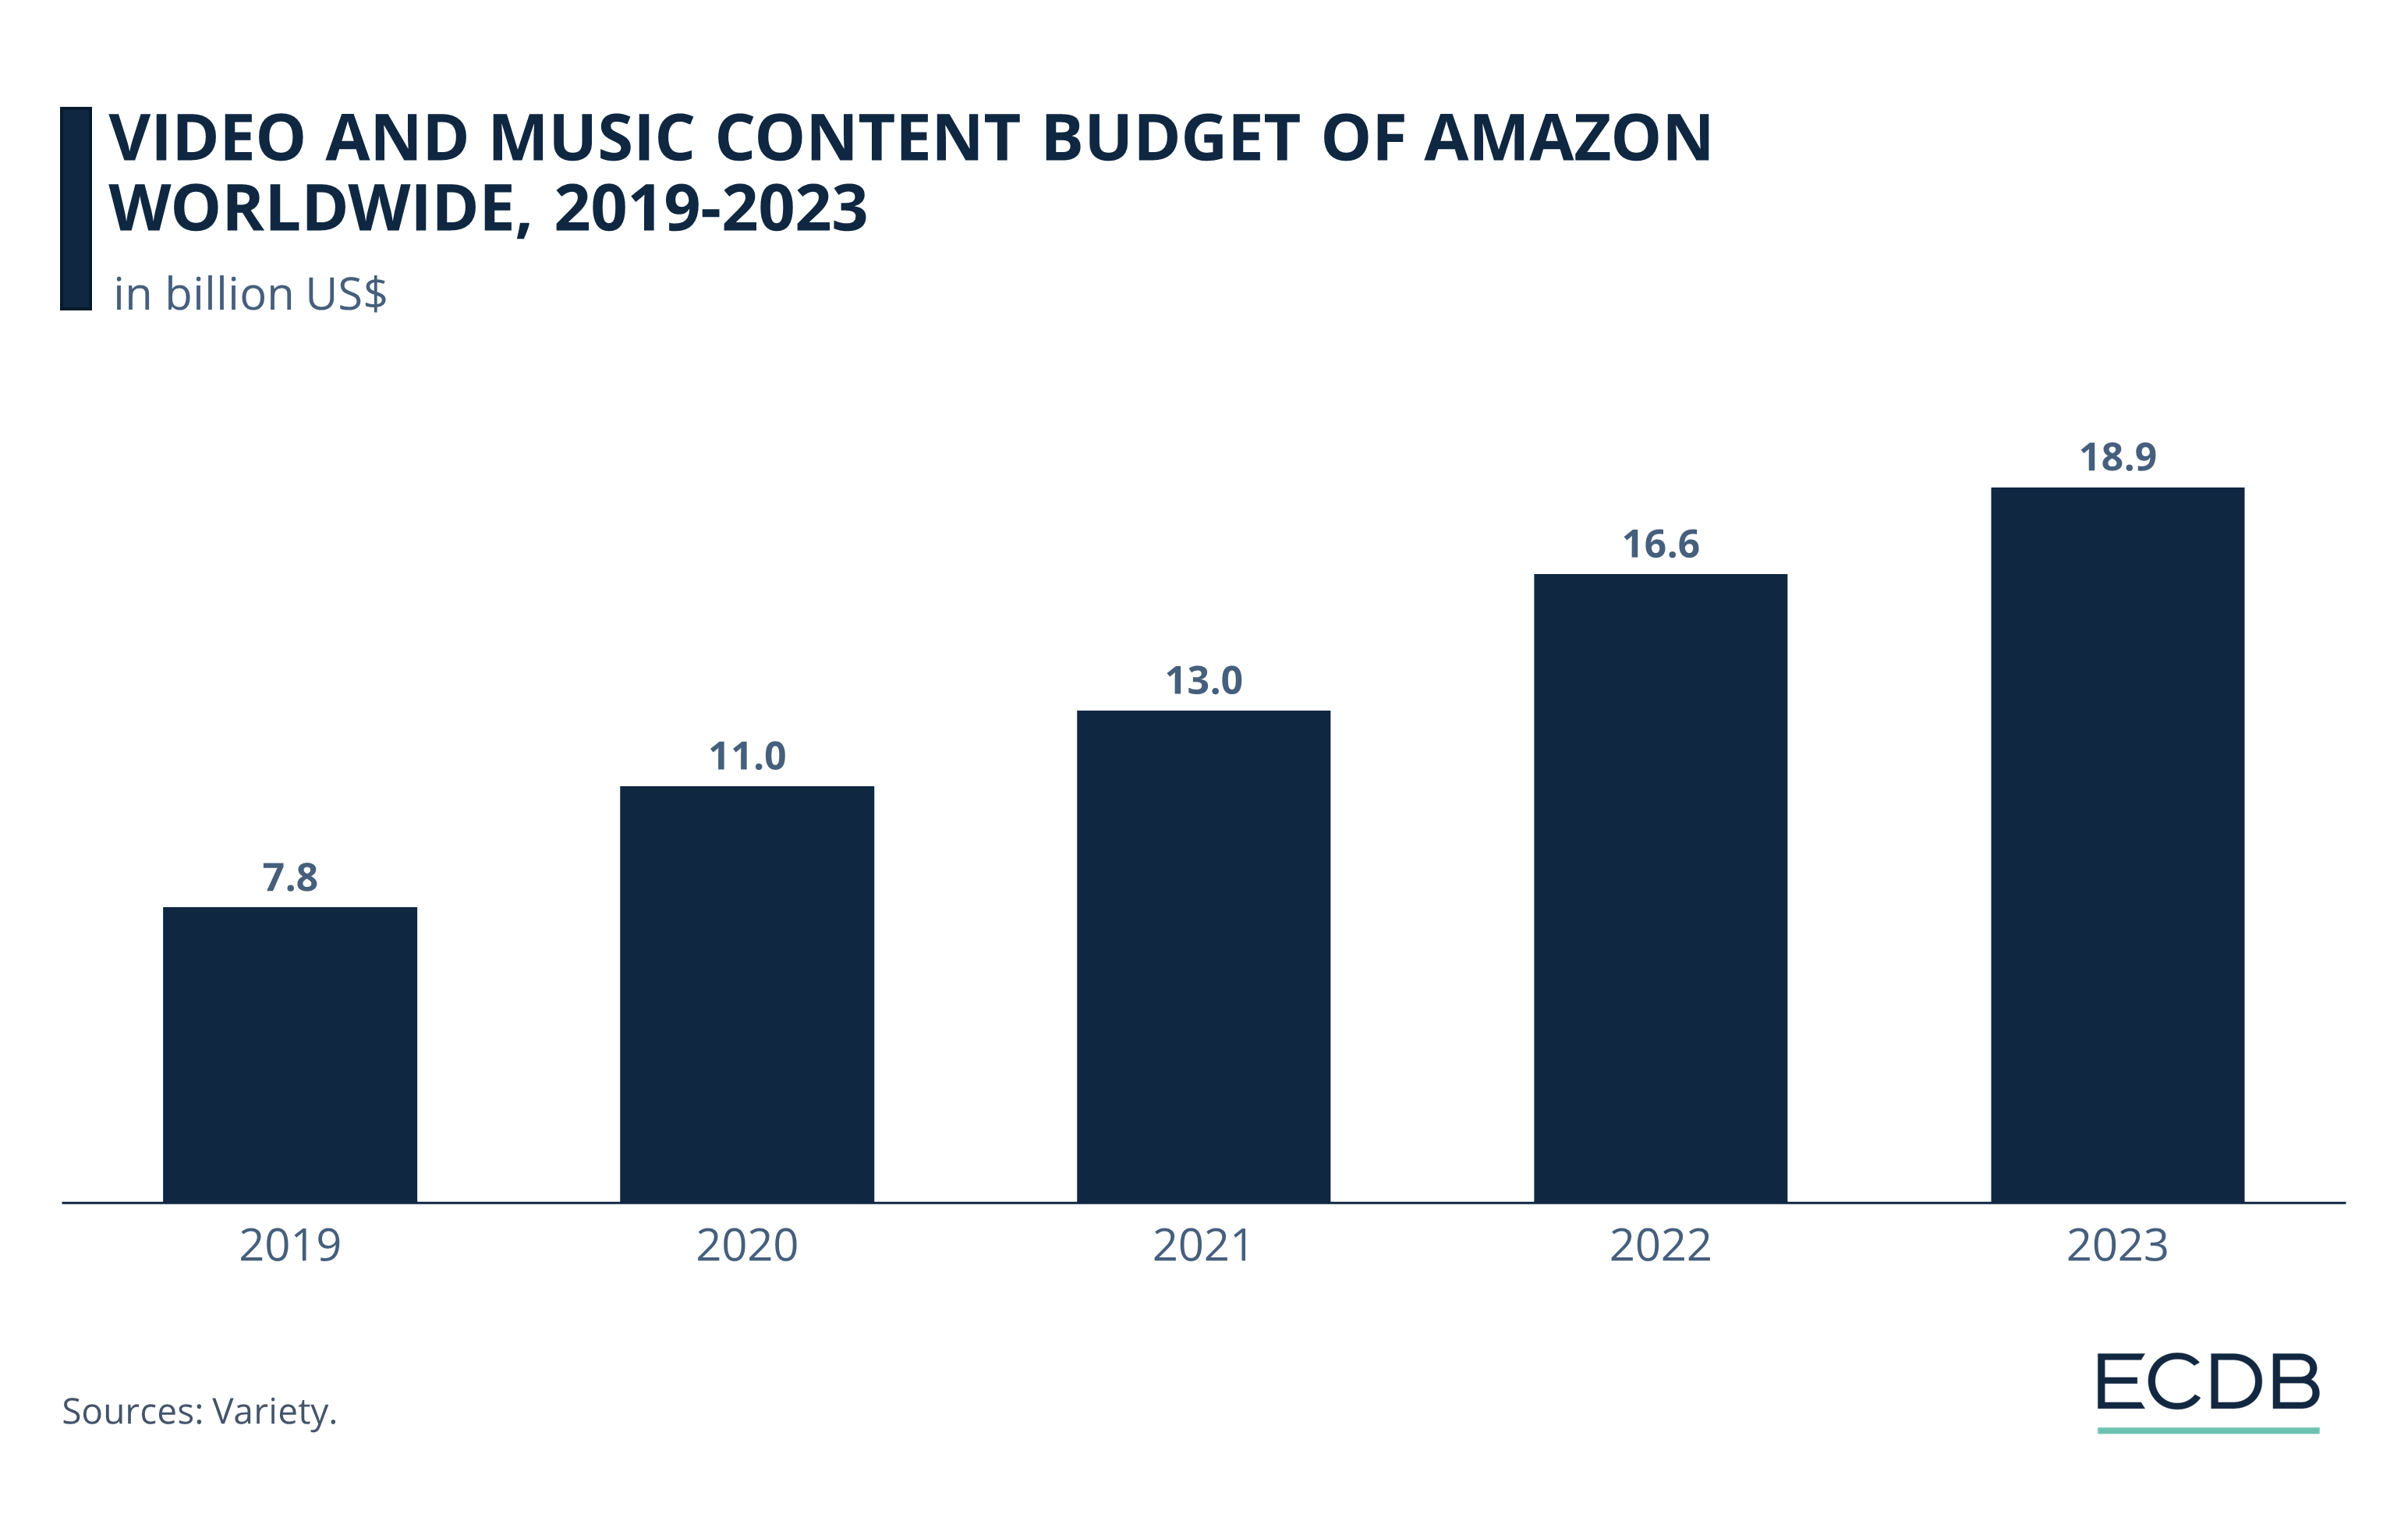 Video and Music Content Budget of Amazon Worldwide, 2013-2023